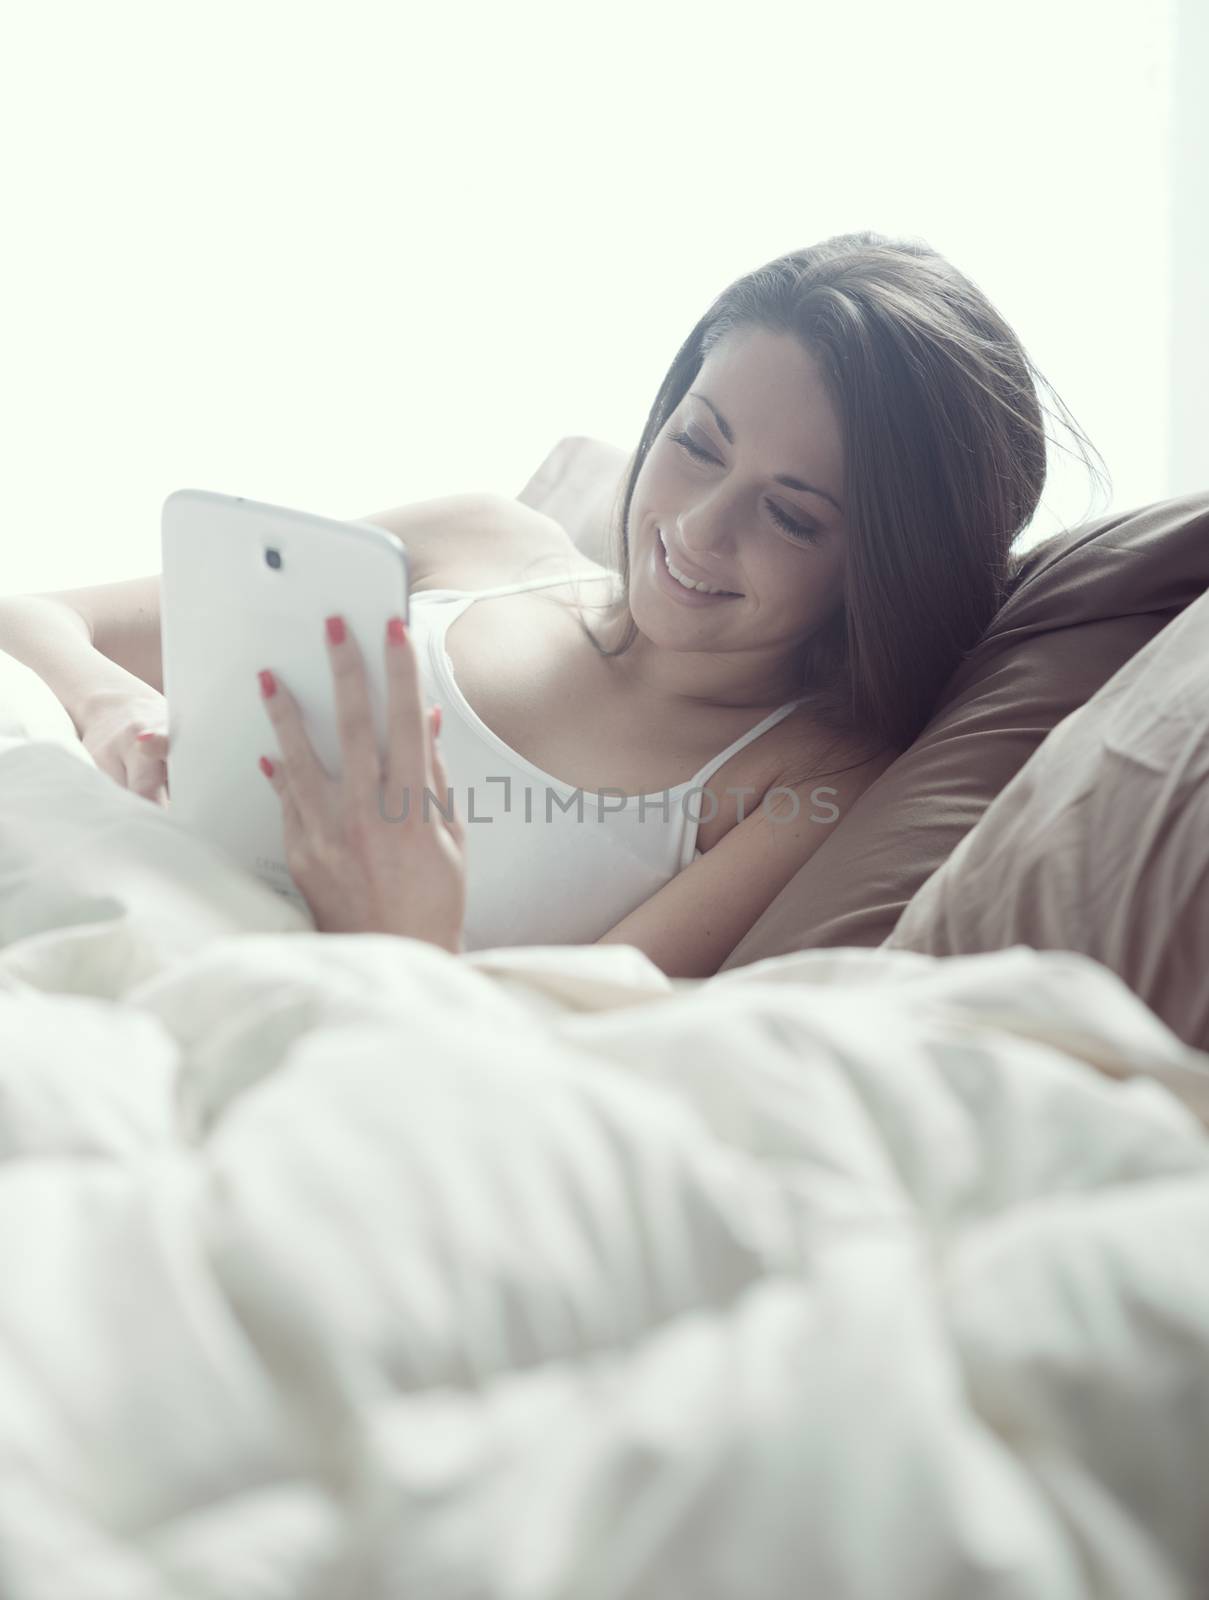 Woman enjoying with a digital tablet in bed in the morning, waking up.